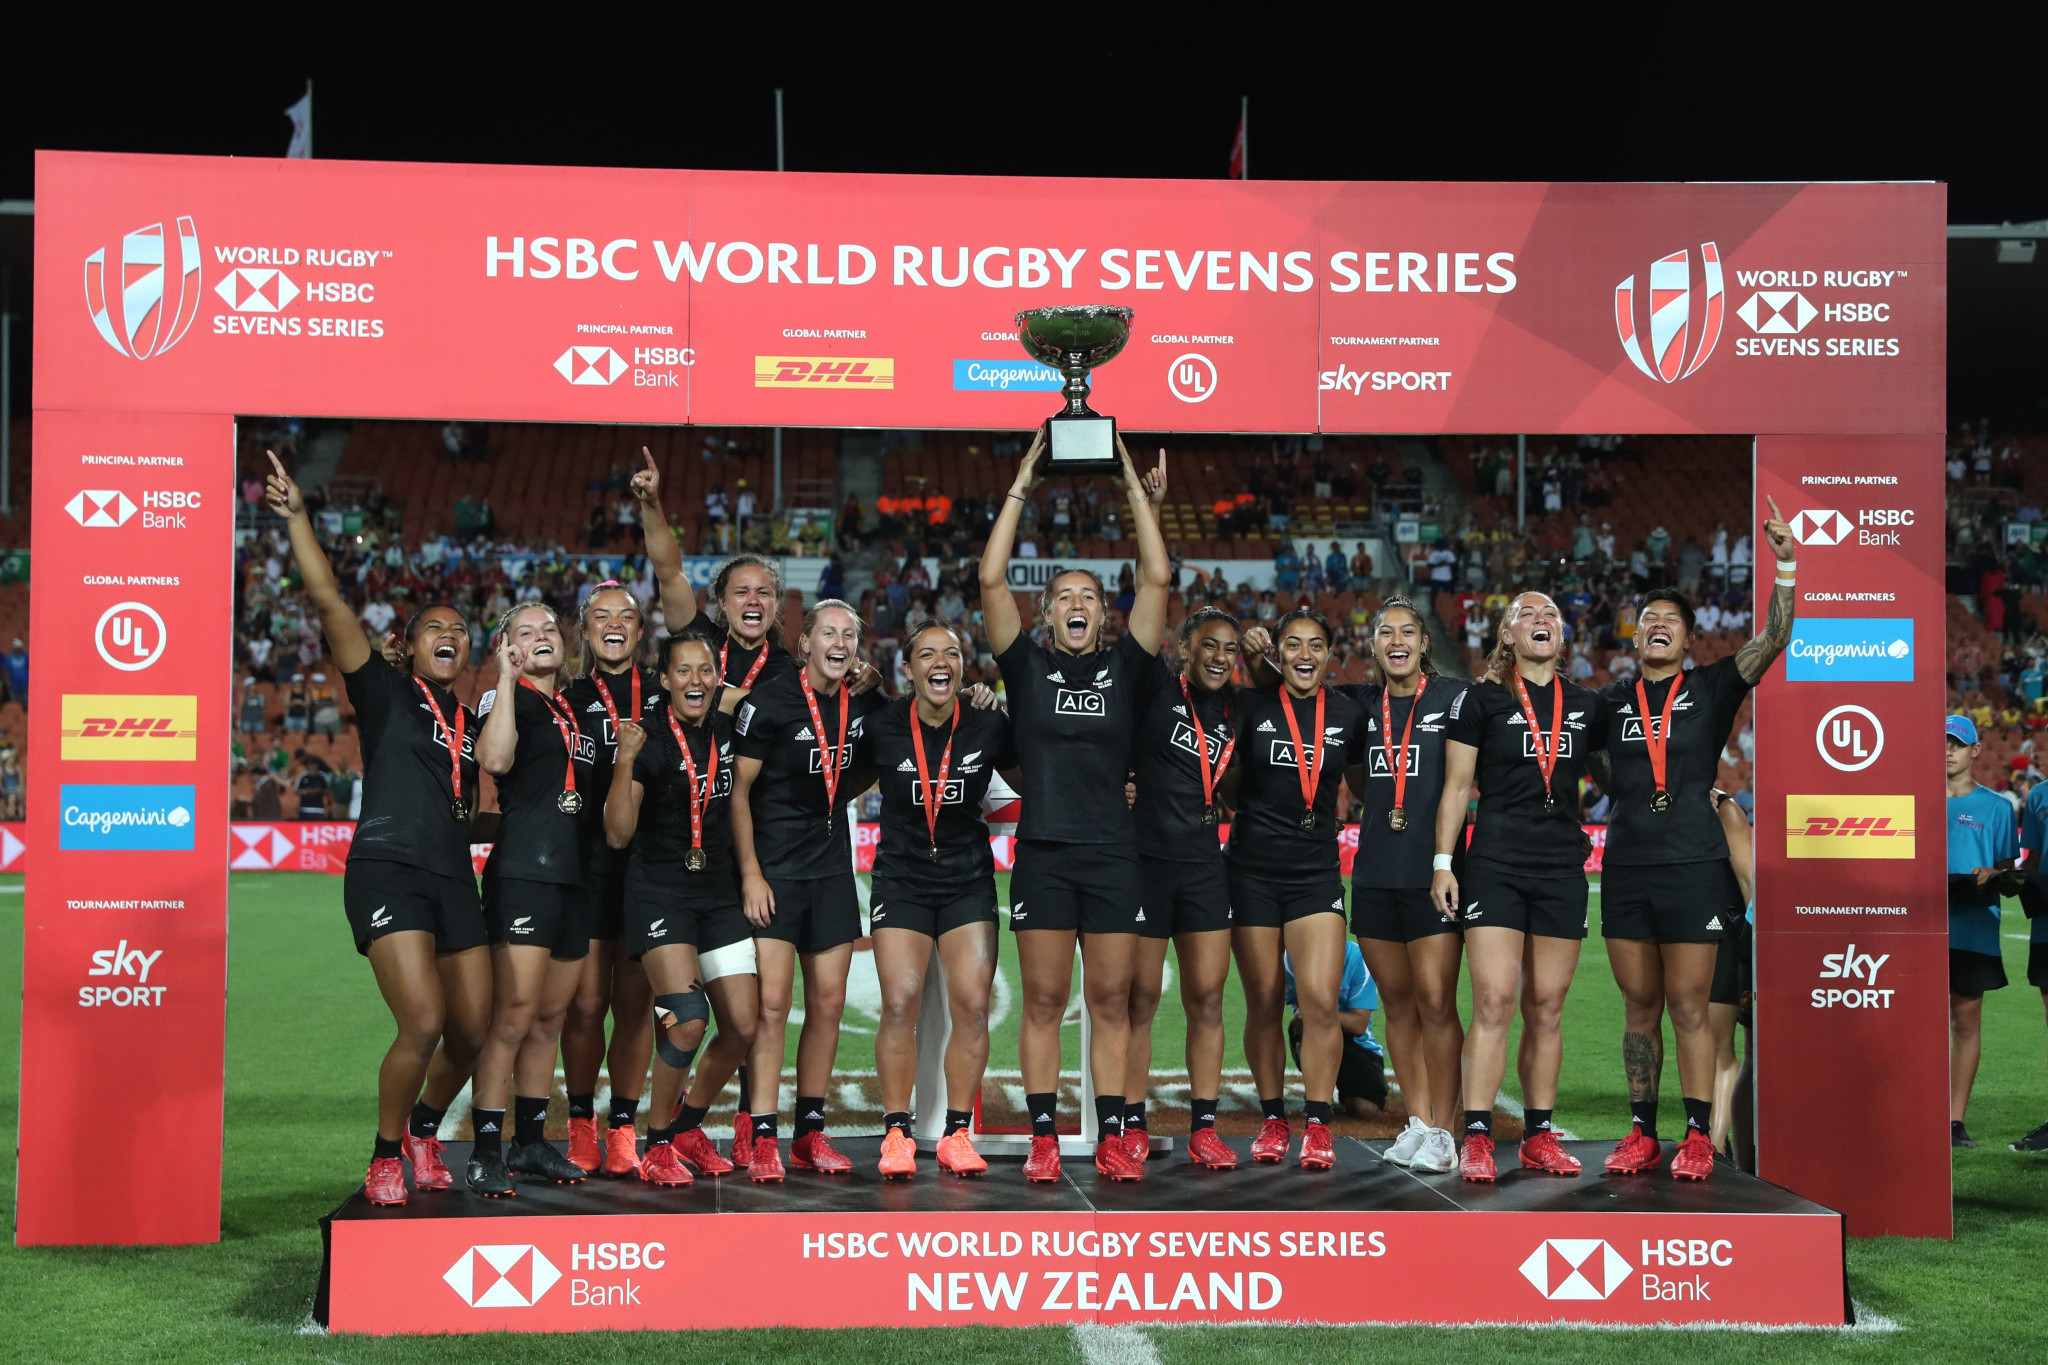 New Zealand take third consecutive World Rugby Women’s Sevens Series title in Hamilton